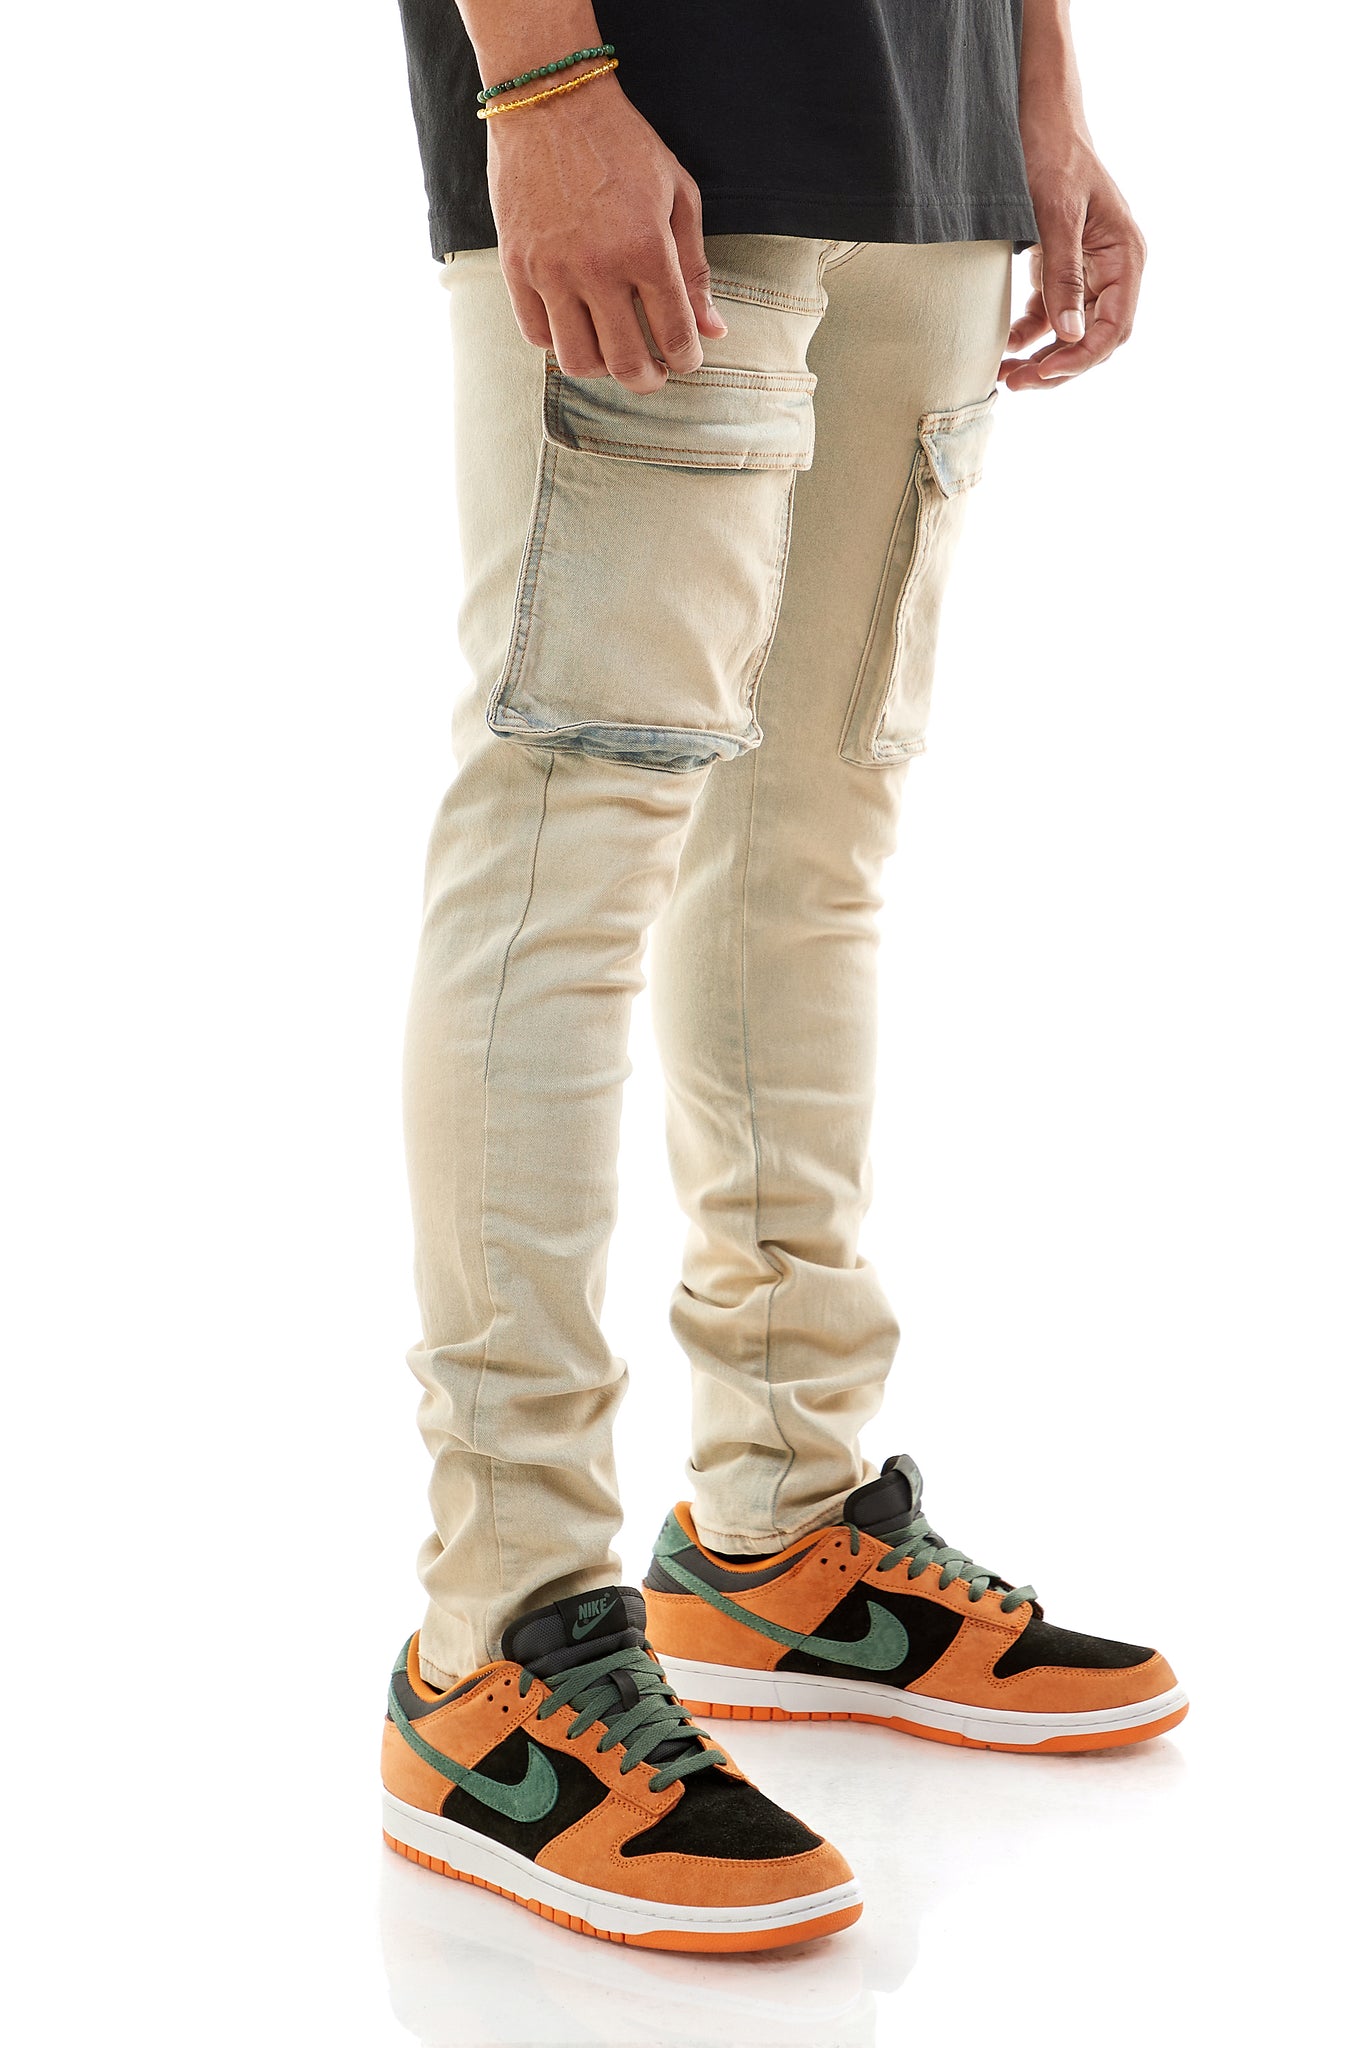 ZIPPED DOUBLE CARGO JEANS